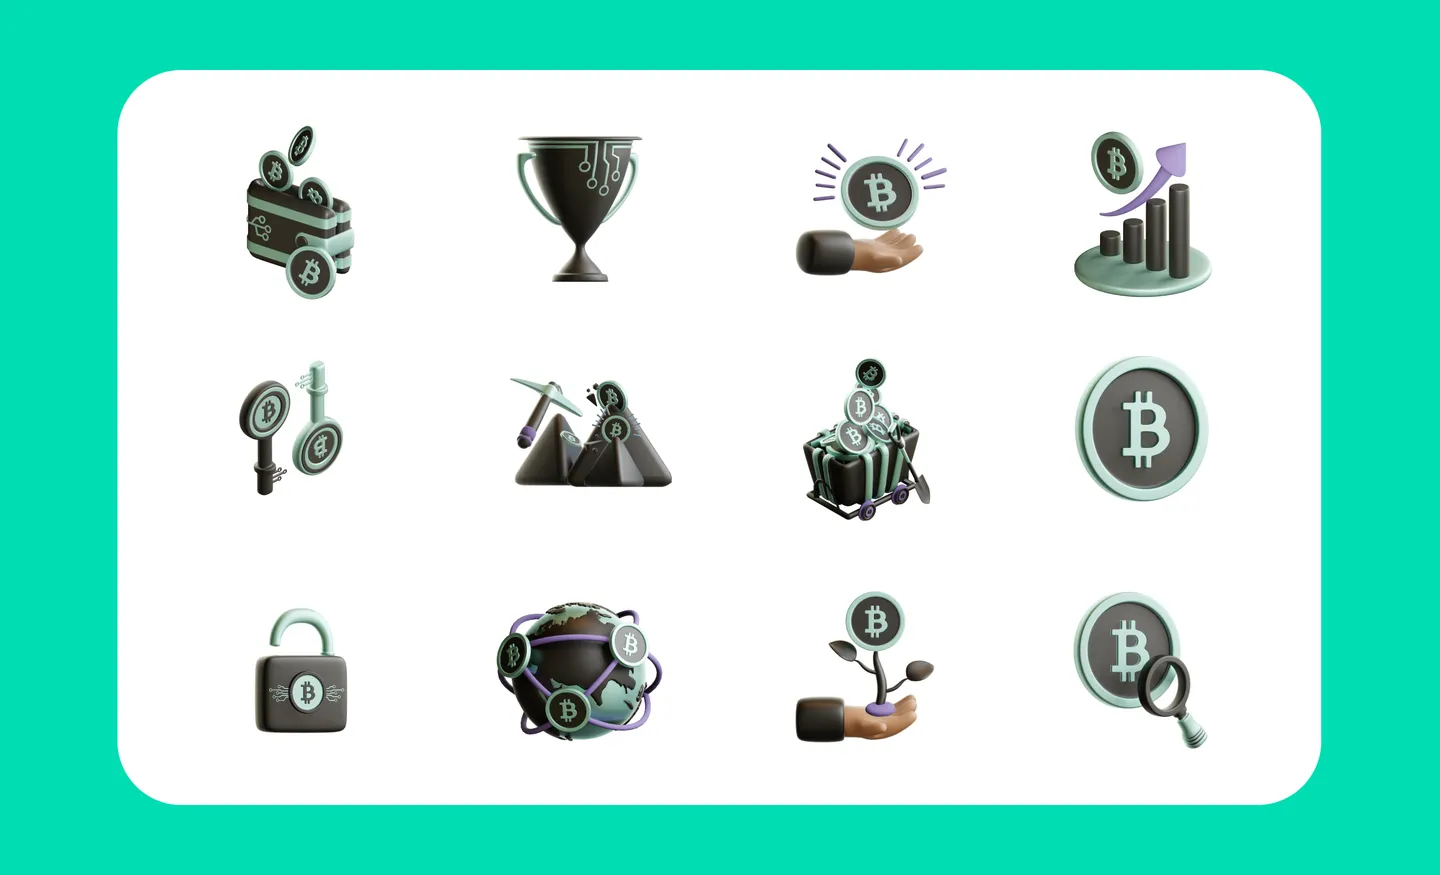 "Crypto 3D Illustration Pack" by Polyray 3D Studio